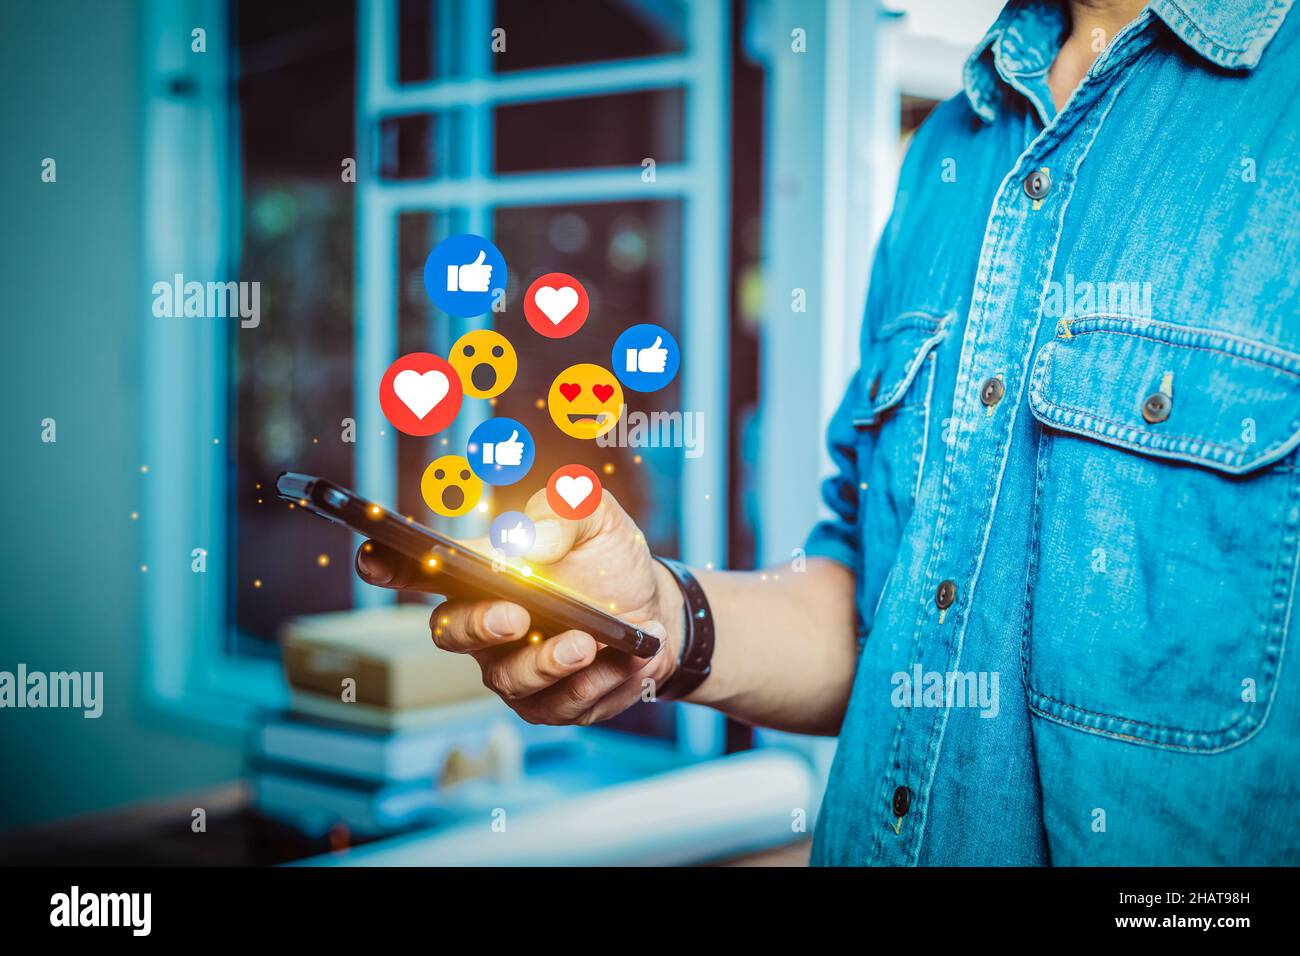 man standing on a mobile phone playing social media in the house Stock Photo